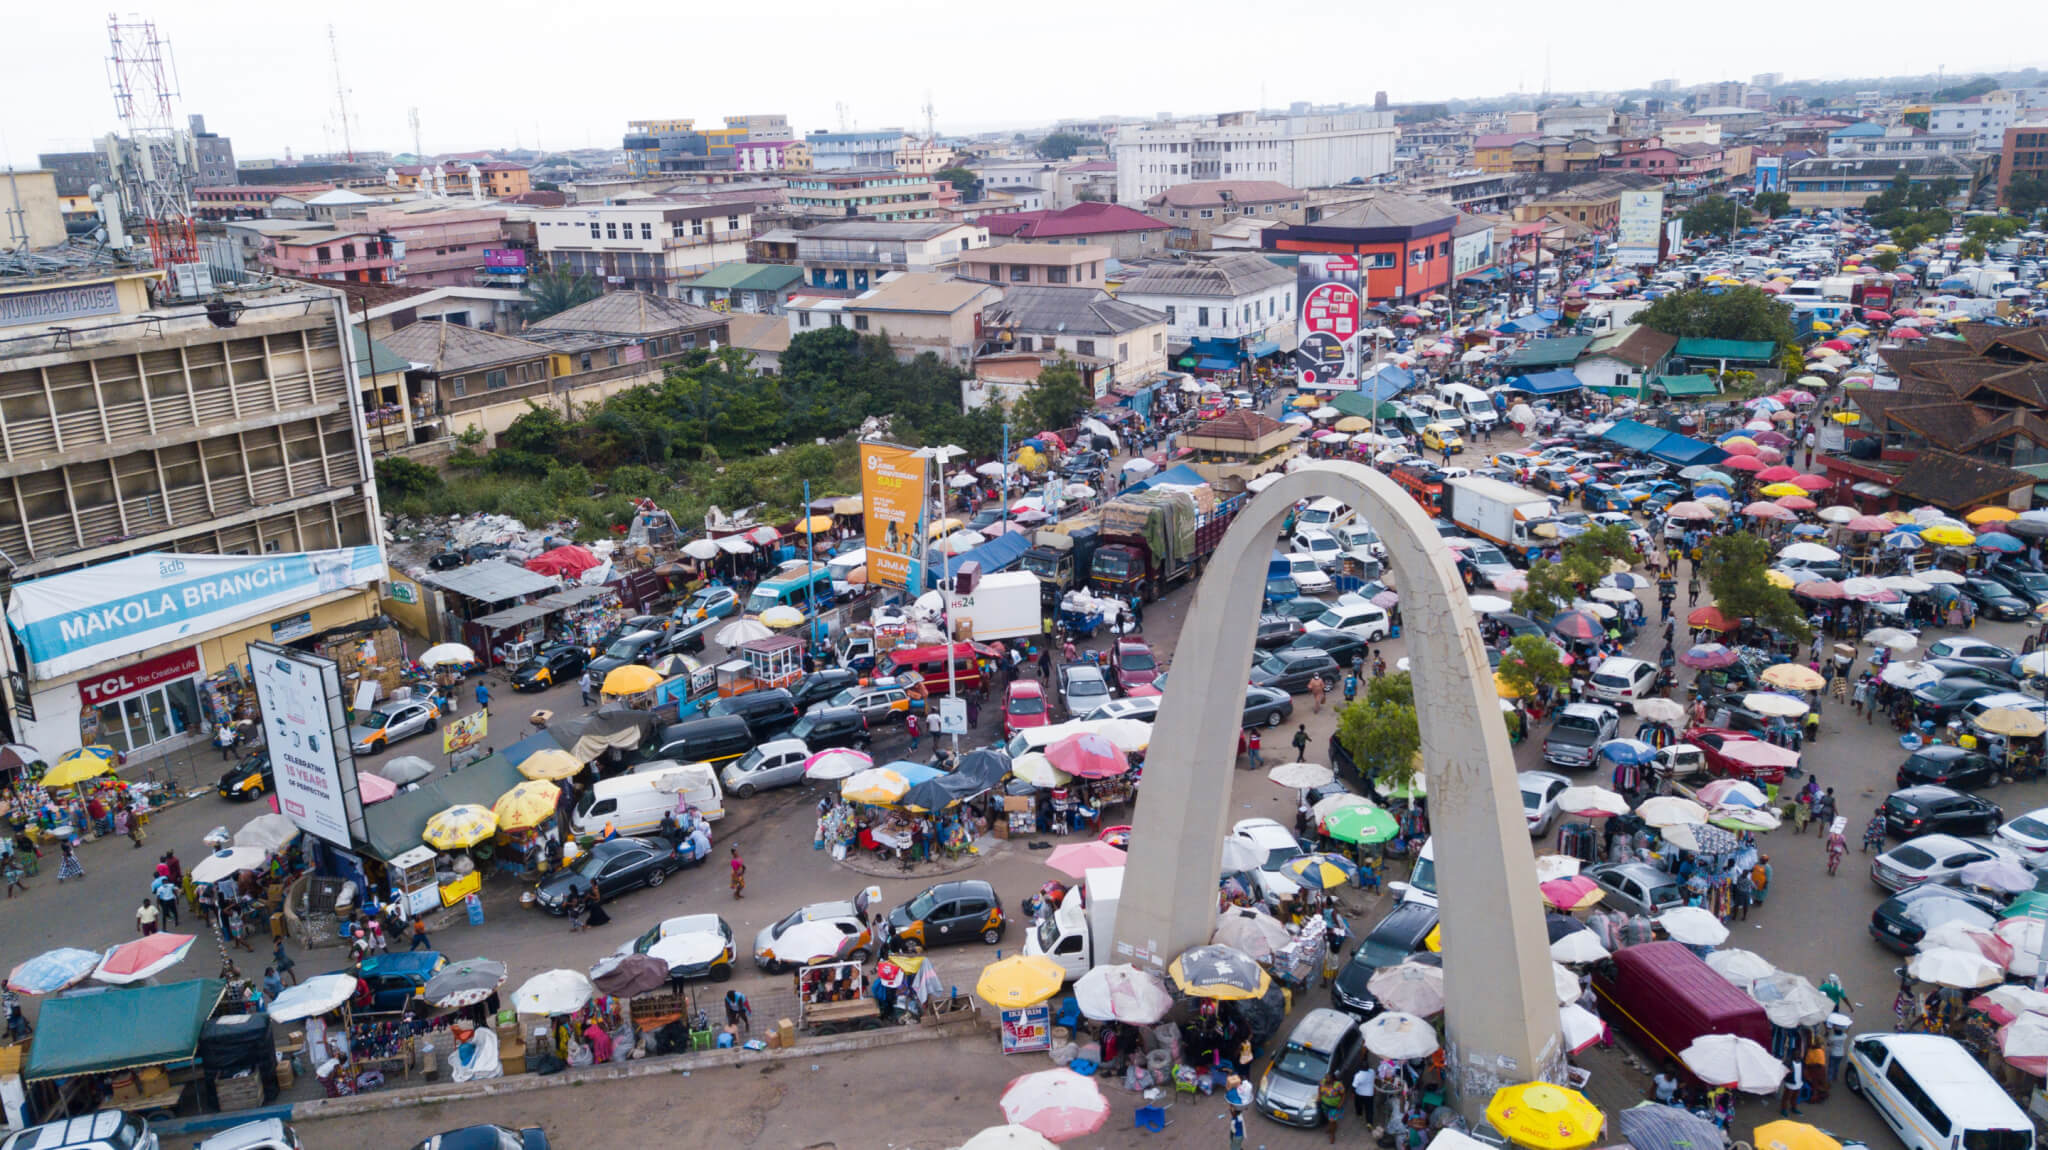 overhead view of a crowded outdoor market in accra